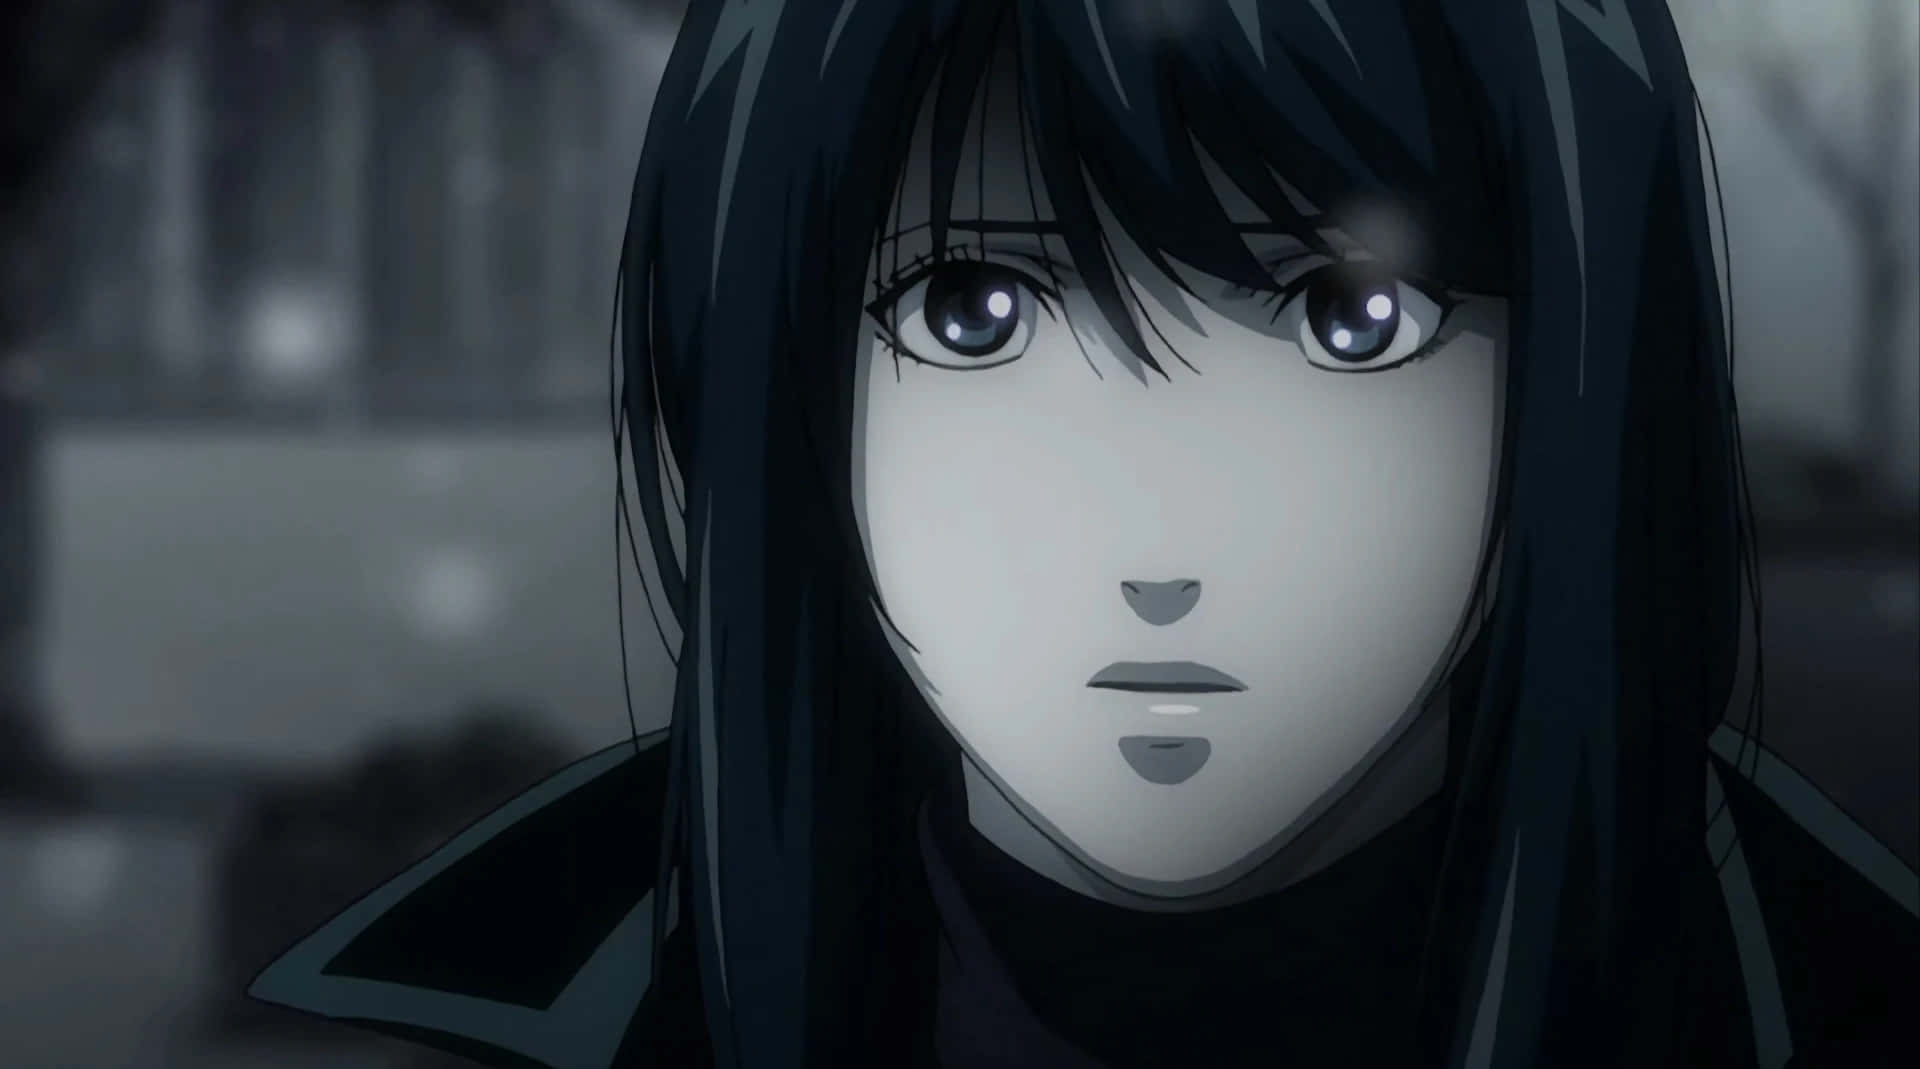 Naomi Misora from Death Note, focusing on her determined expression Wallpaper